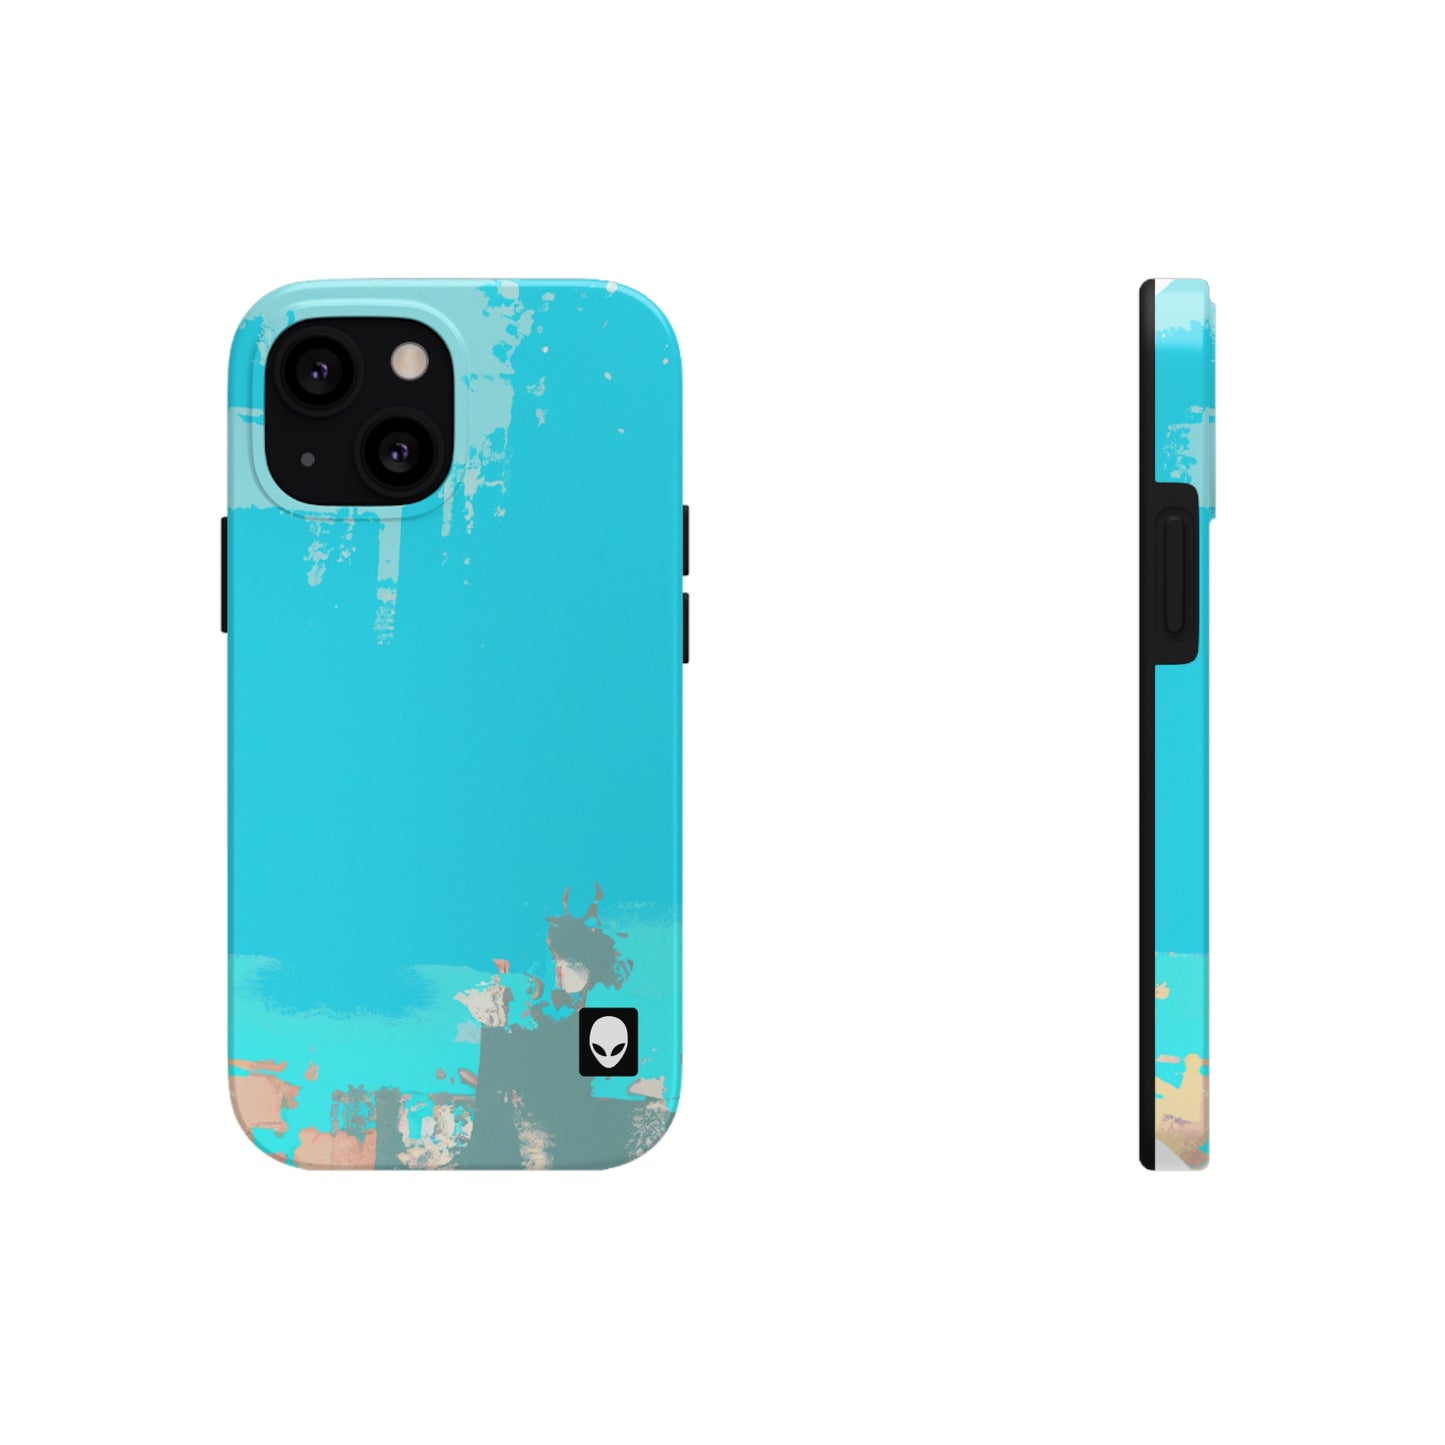 "A Breezy Skyscape: A Combination of Tradition and Modernity" - The Alien Tough Phone Cases